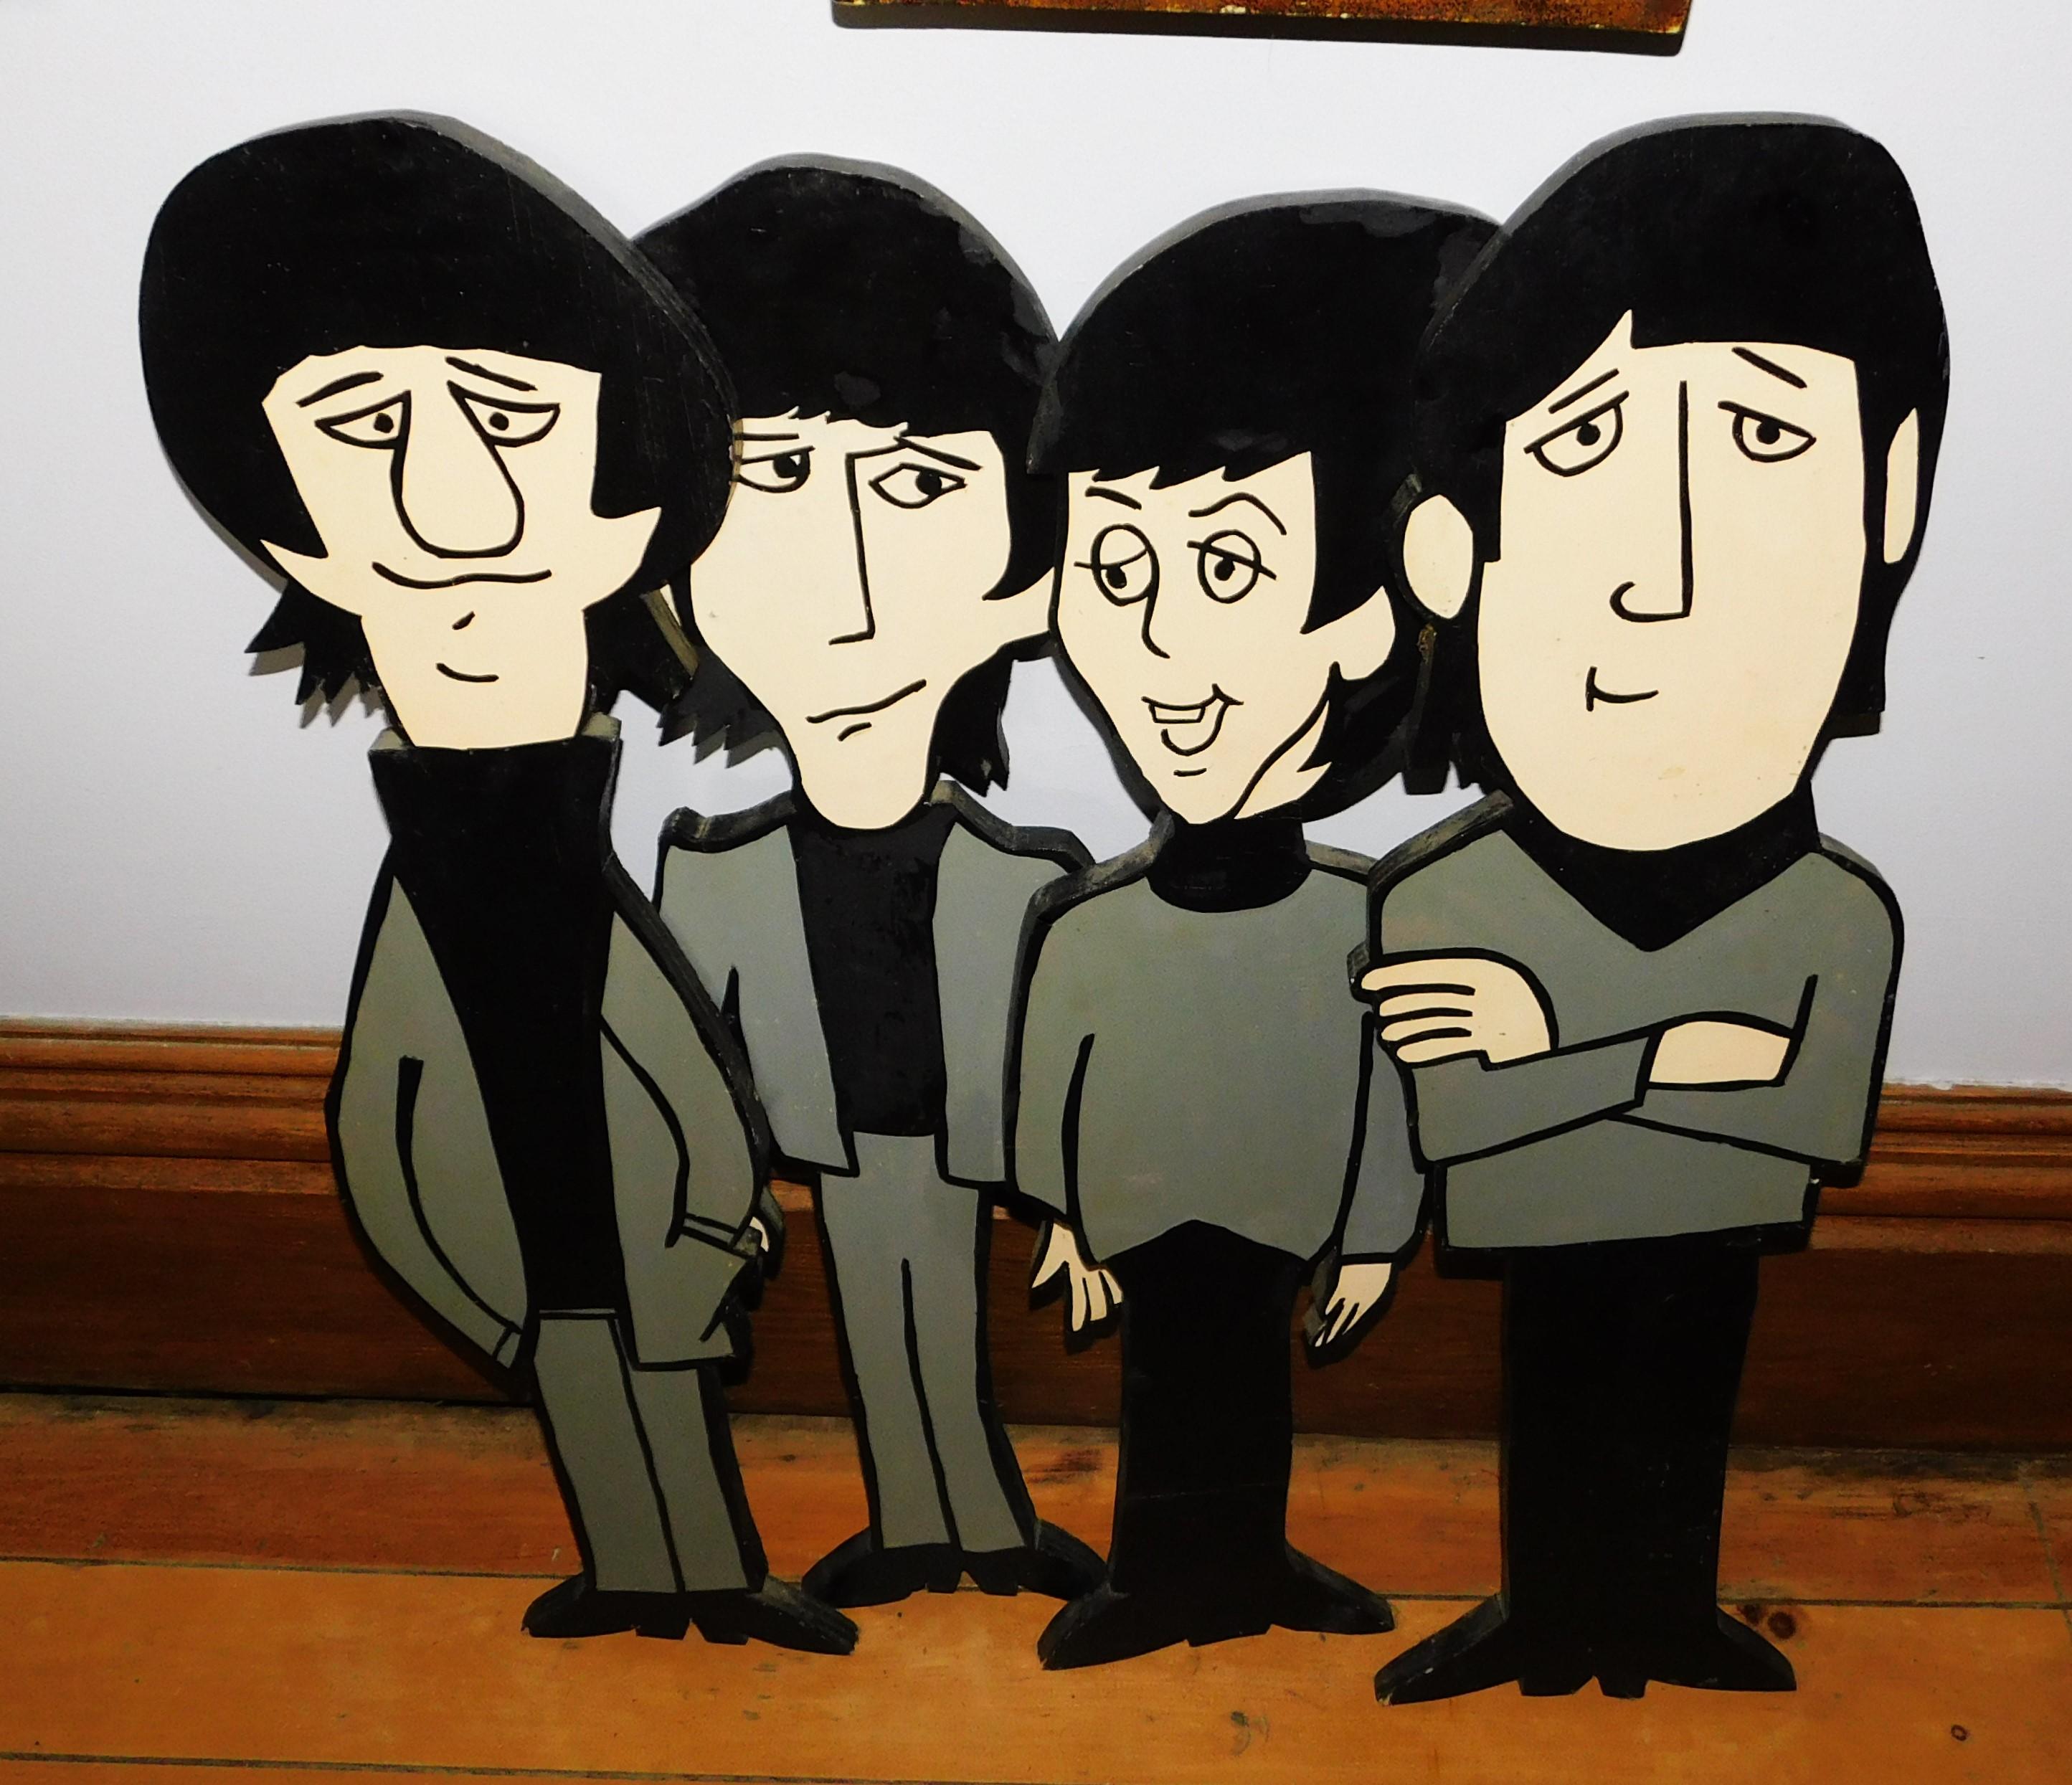 These four rare Beatle wooden Stand up cutouts are as the Fab Four as they appeared in the Cartoon TV series that ran from 1965 to 1969. The figures are all-over two feet high, John Lennon is 26 inches, Paul McCartney is 24.5 inches, George Harrison